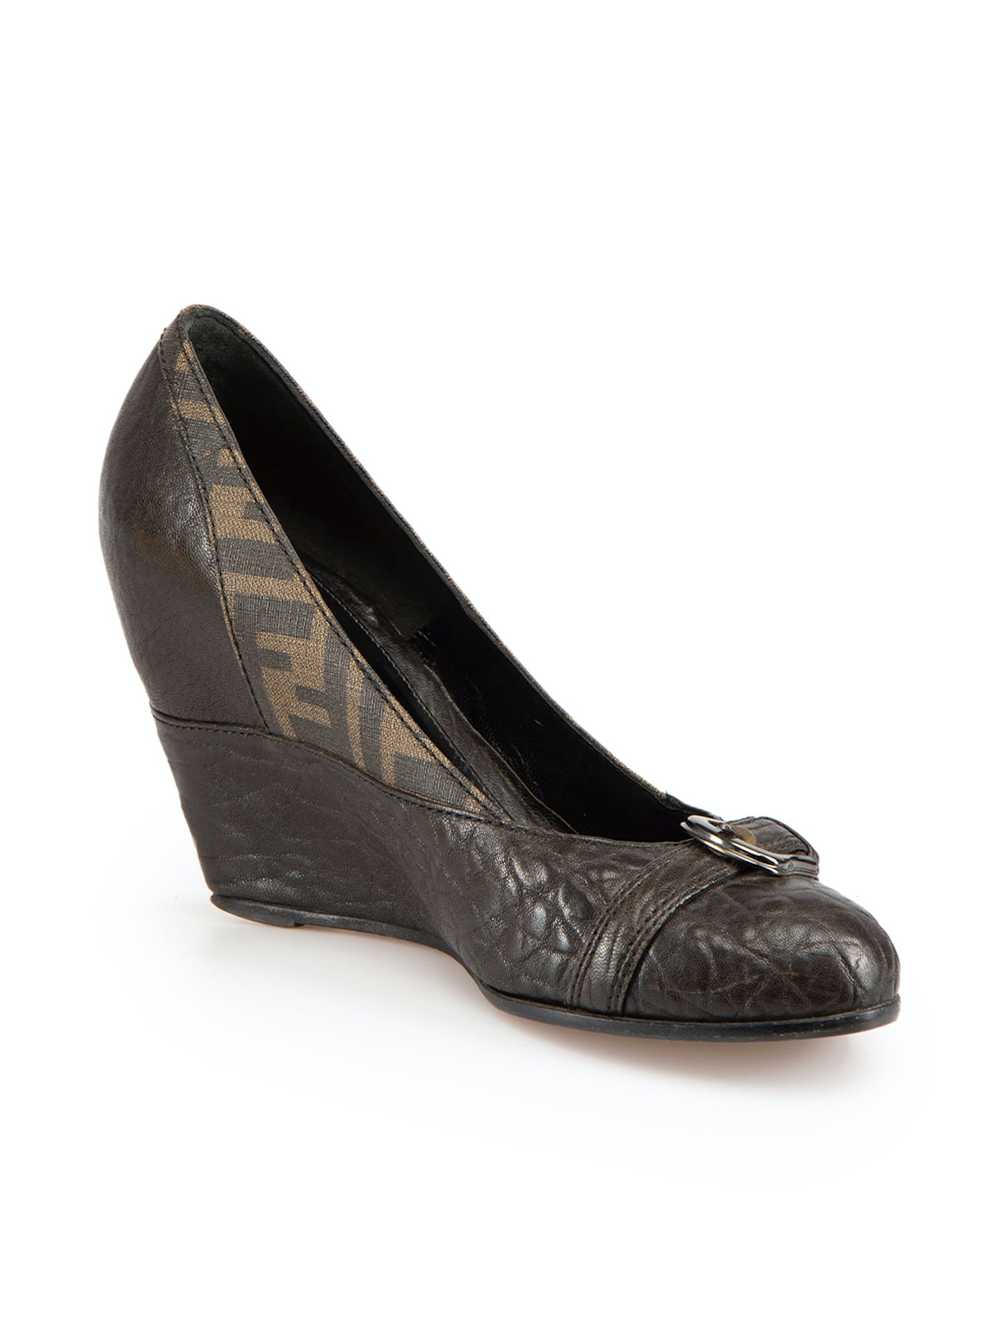 Fendi Brown Zucca Panel Buckled Accent Wedges - image 2